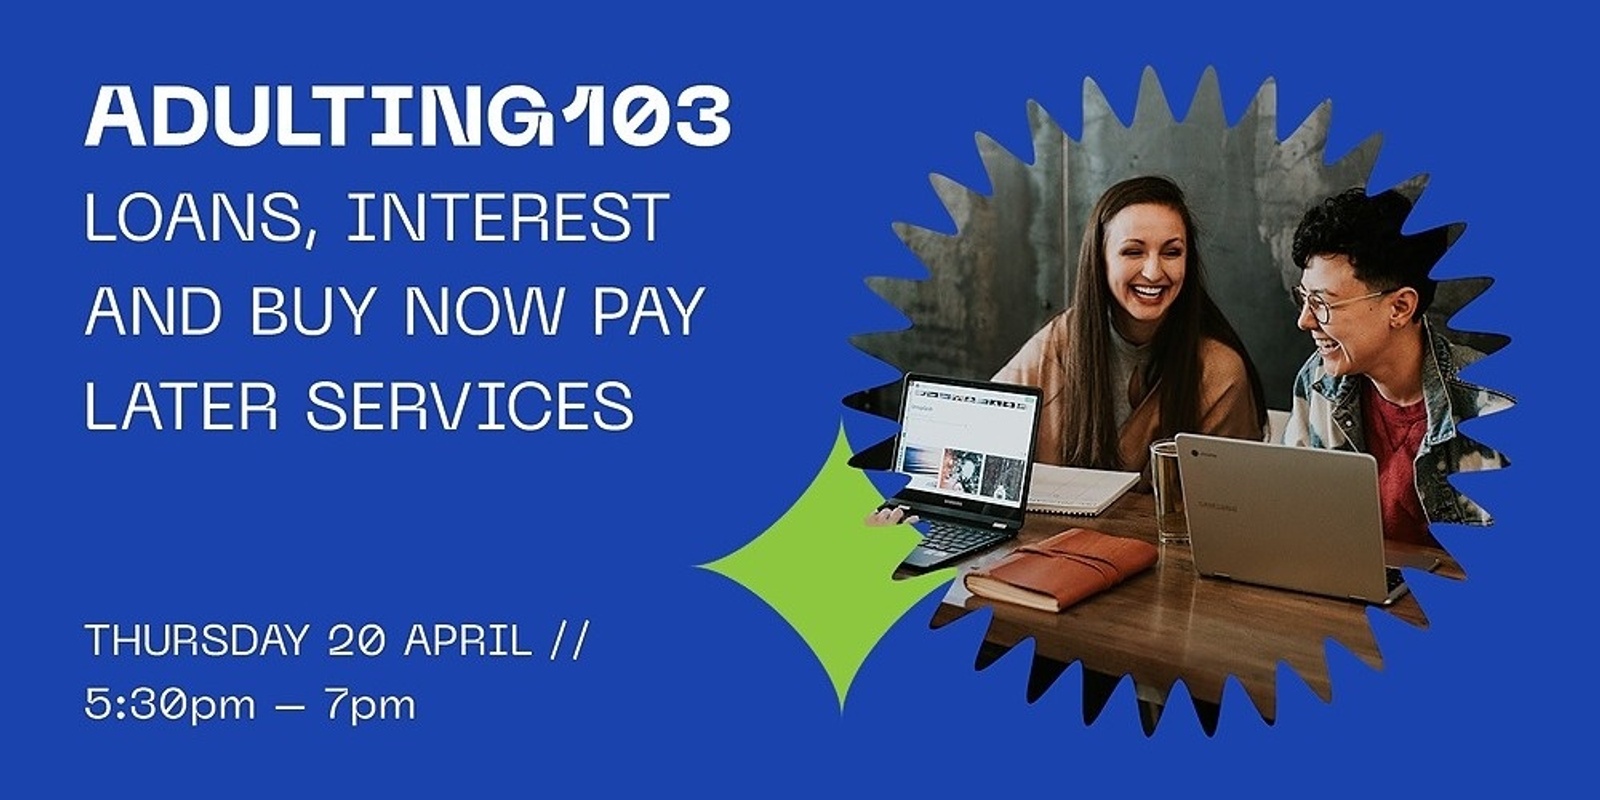 Banner image for ADULTING103: Loans, interest and Buy Now/Pay Later Services